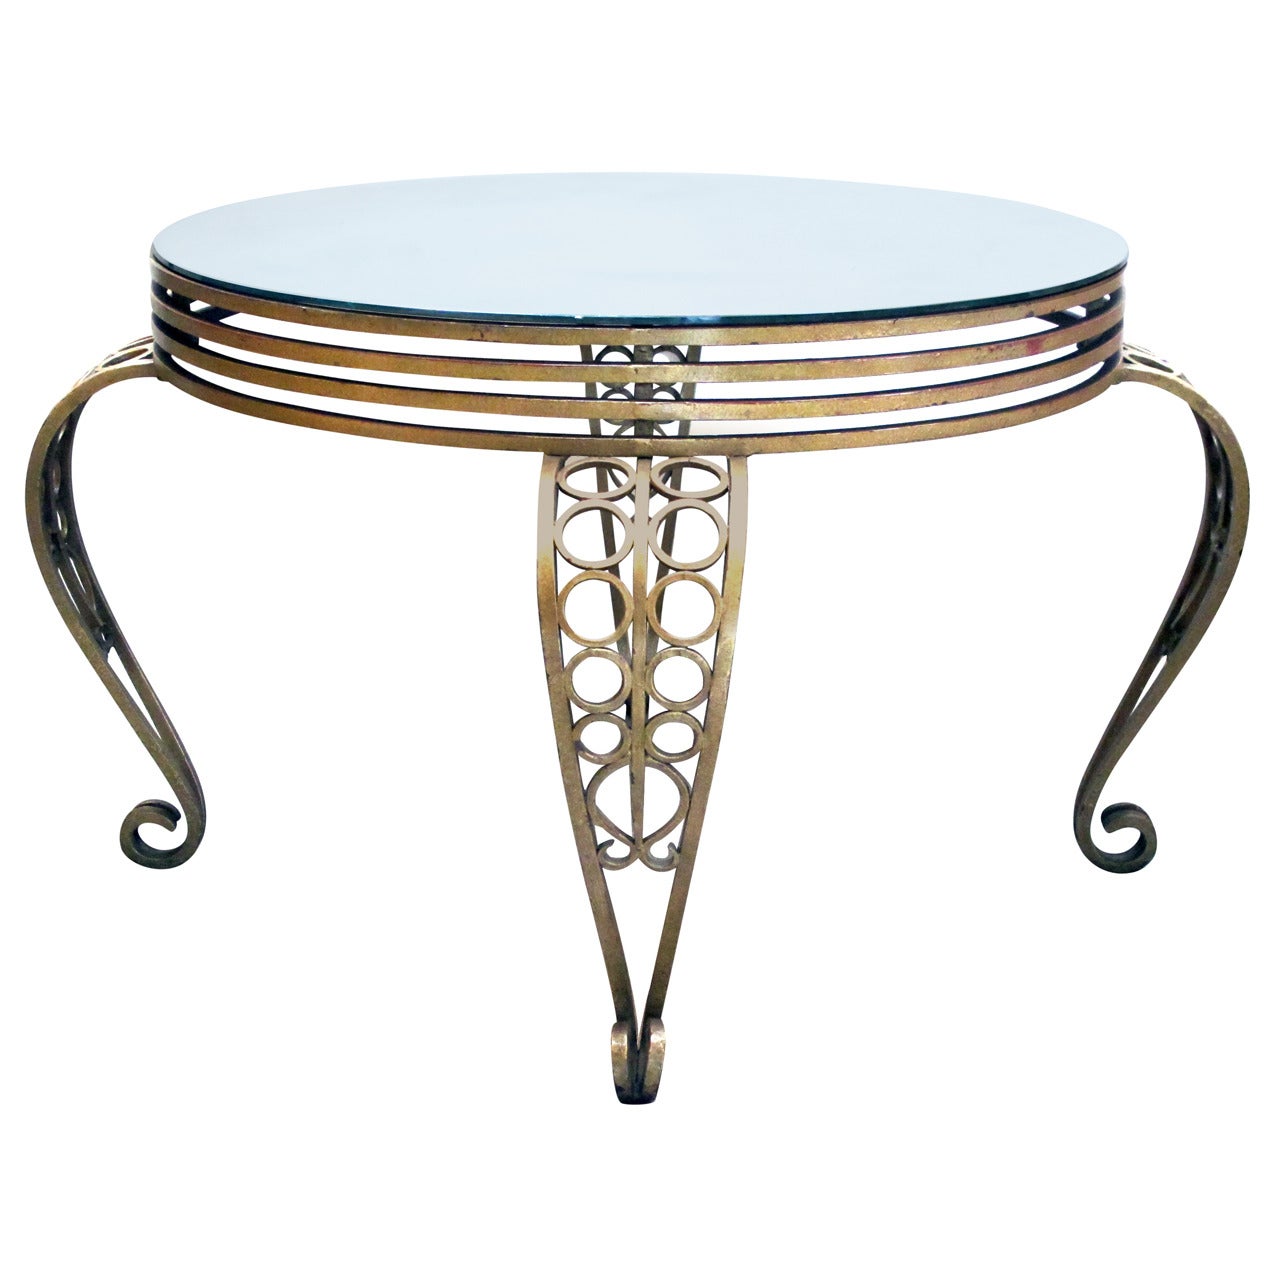 Shapely French Art Deco Gilt Iron Circular Table with Mirrored Top